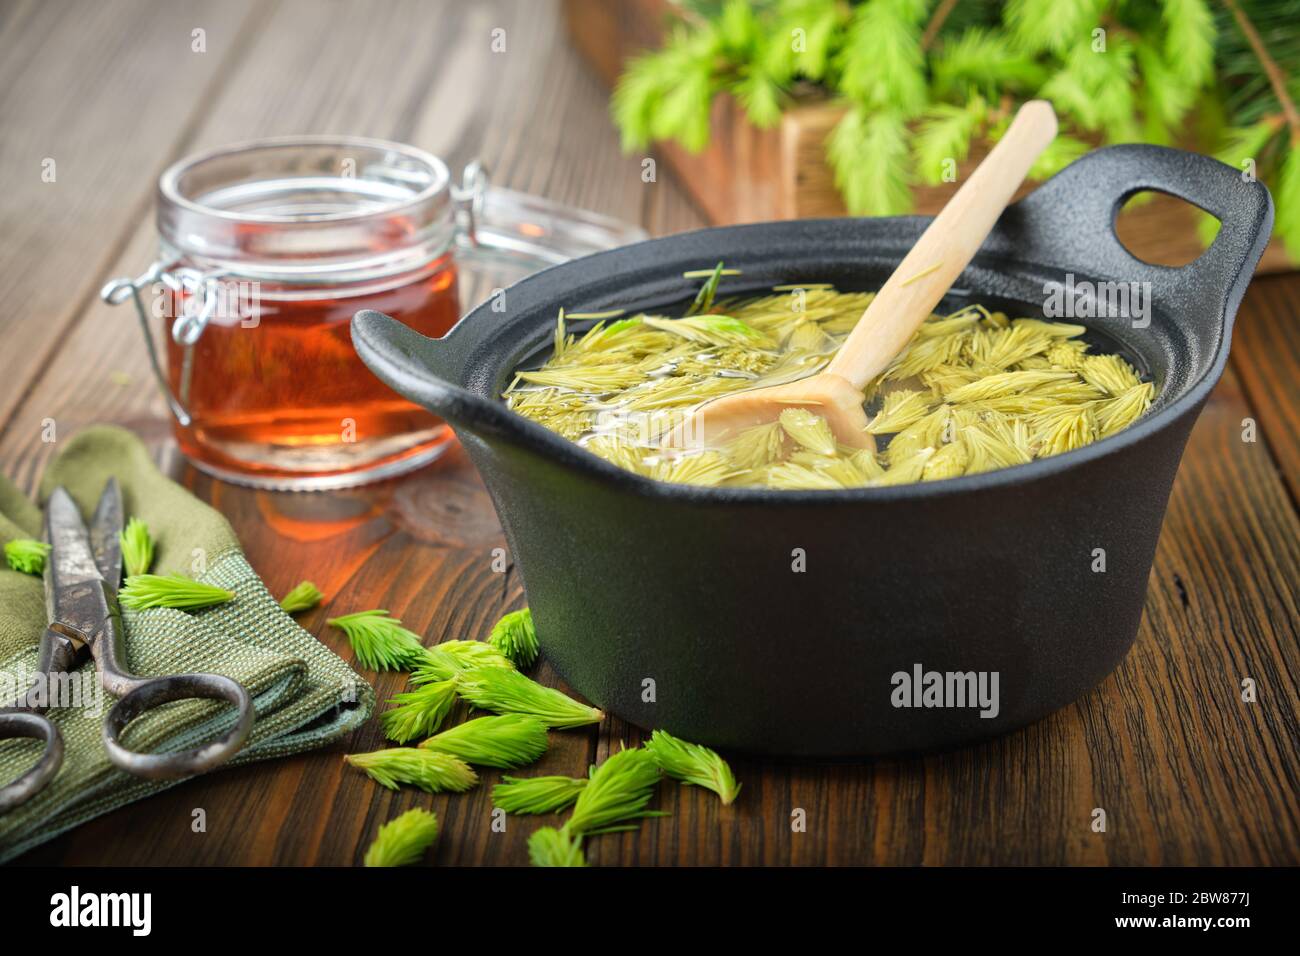 Cooked spruce tips in a black pan, jar of  honey or syrup from fir buds and needles, twigs of fir tree on wooden table. Making Spruce tips jam at home Stock Photo